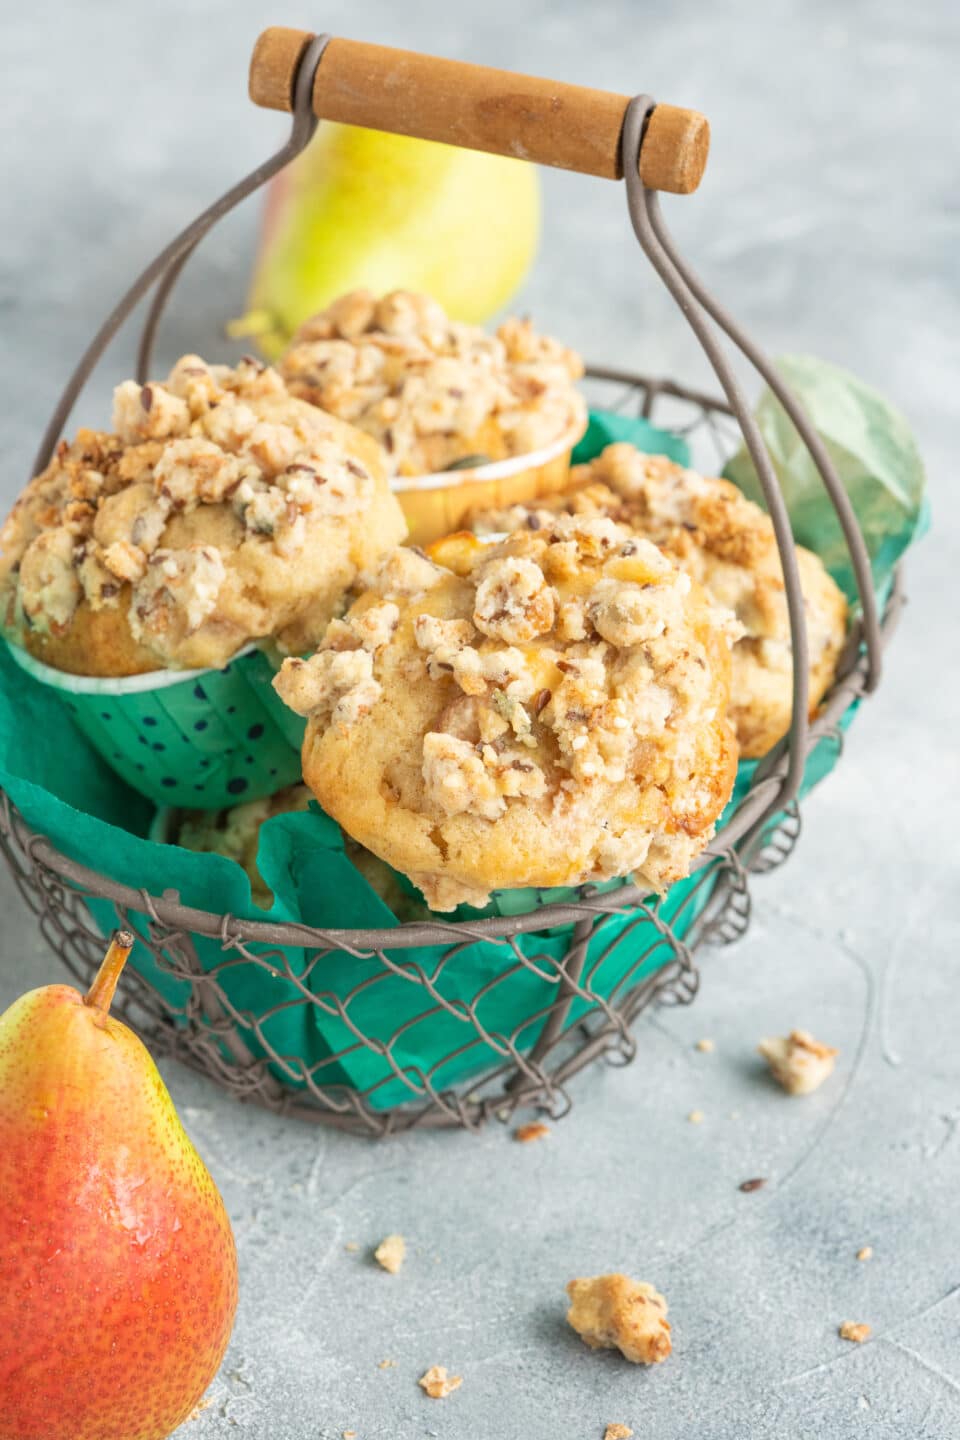 Pear muffins in basket